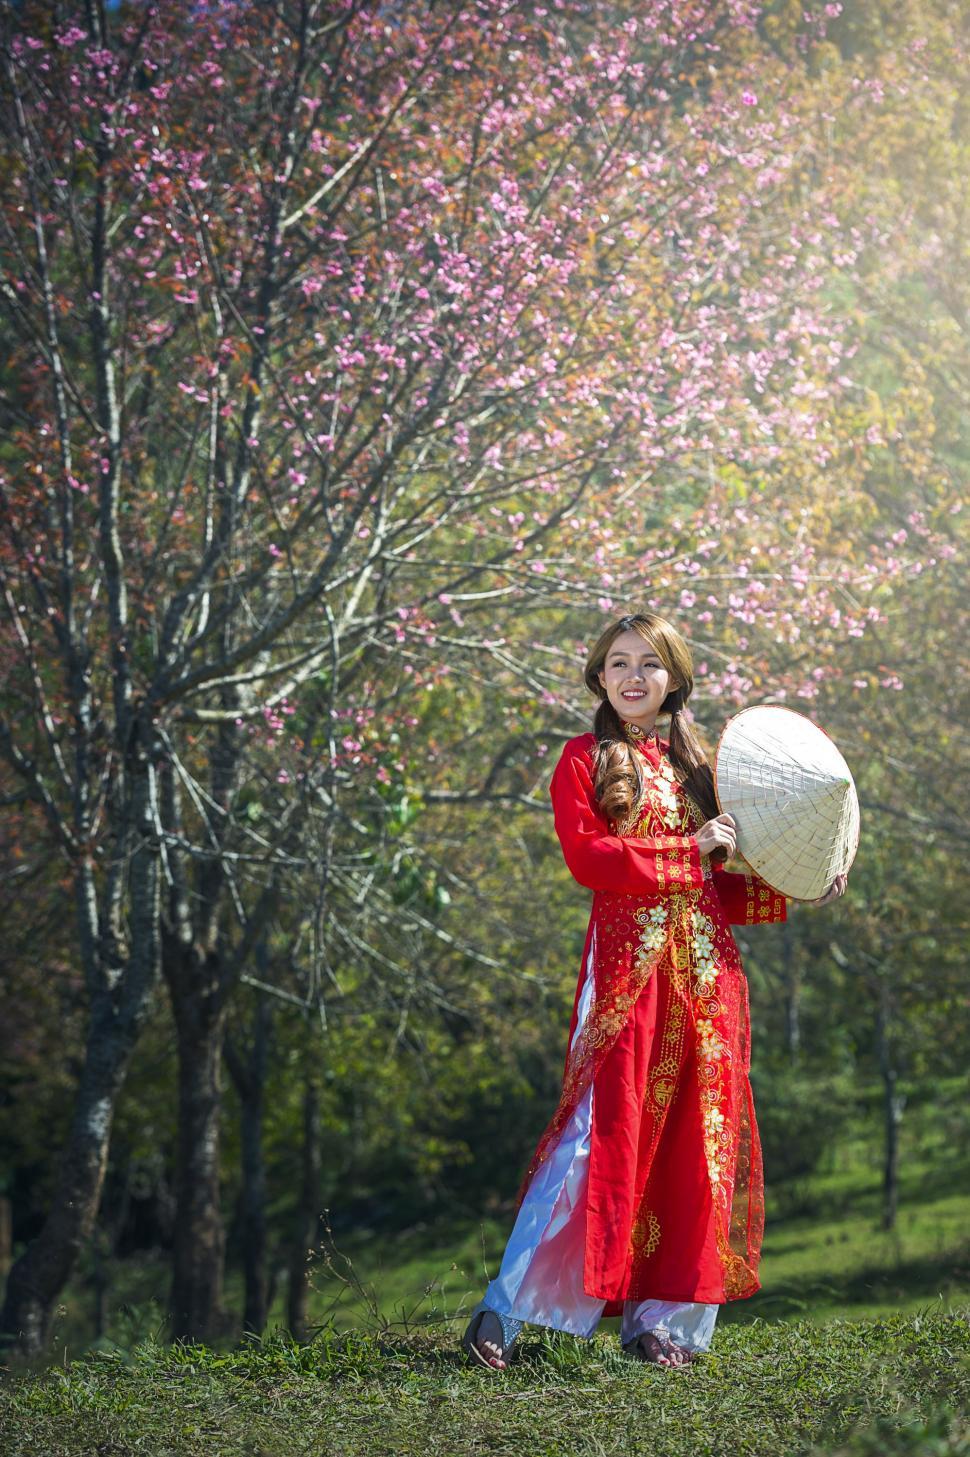 Free Image of Woman in Red Dress Holding White Ball 